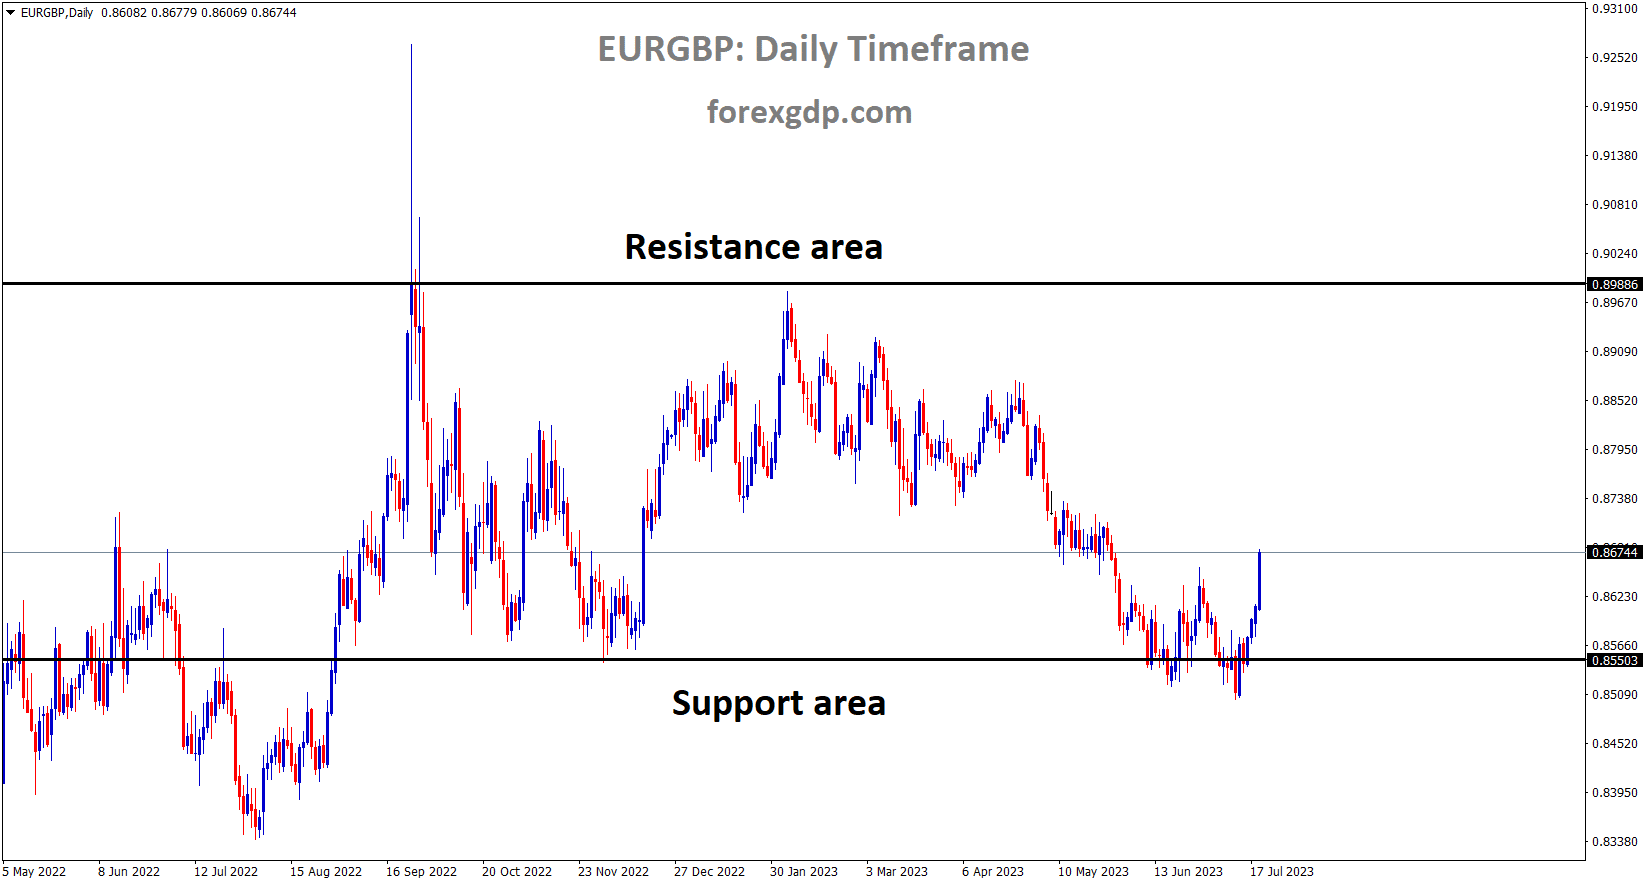 EURGBP is moving in the Box pattern and the market has rebounded from the horizontal support area of the pattern